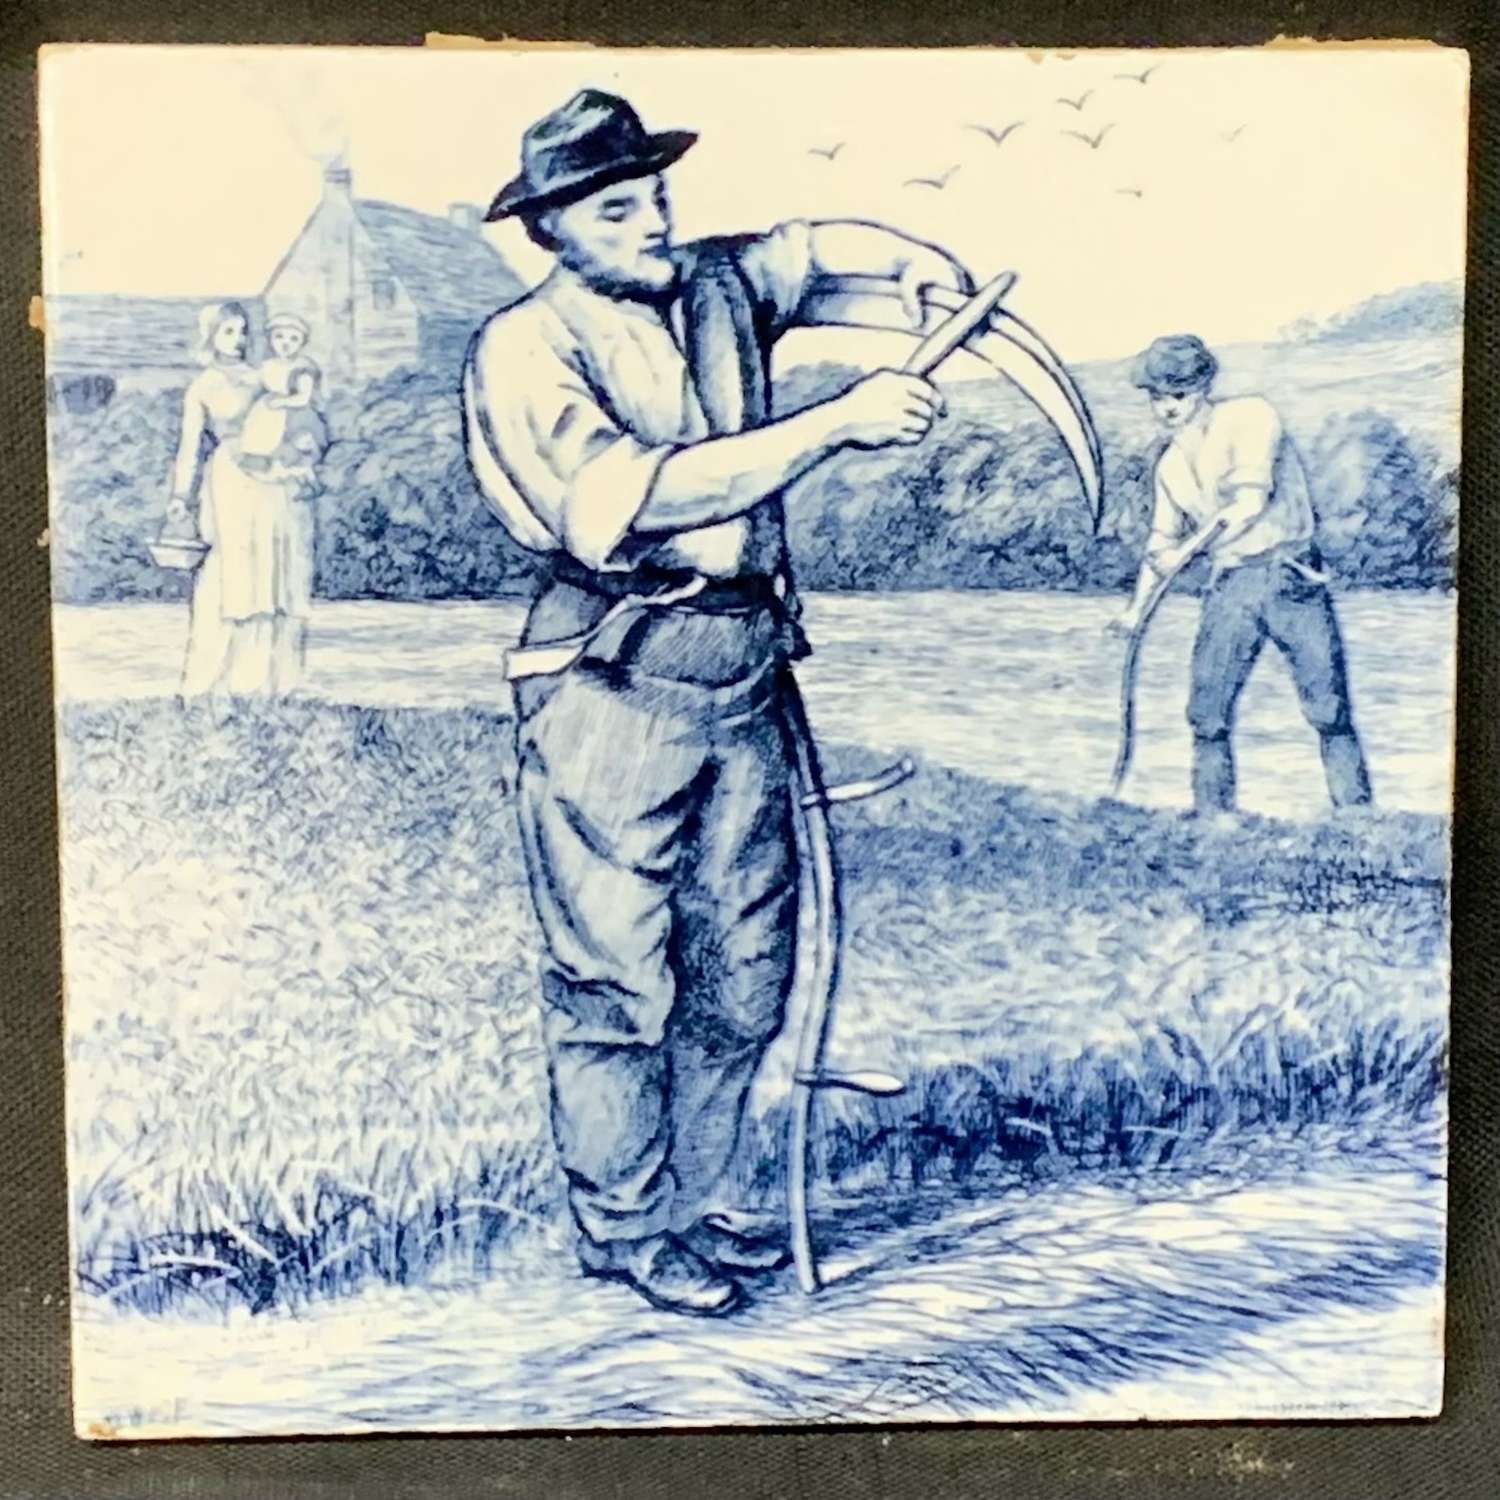 Wm Wise Country Life Tile ~ Cutting Hay 1882